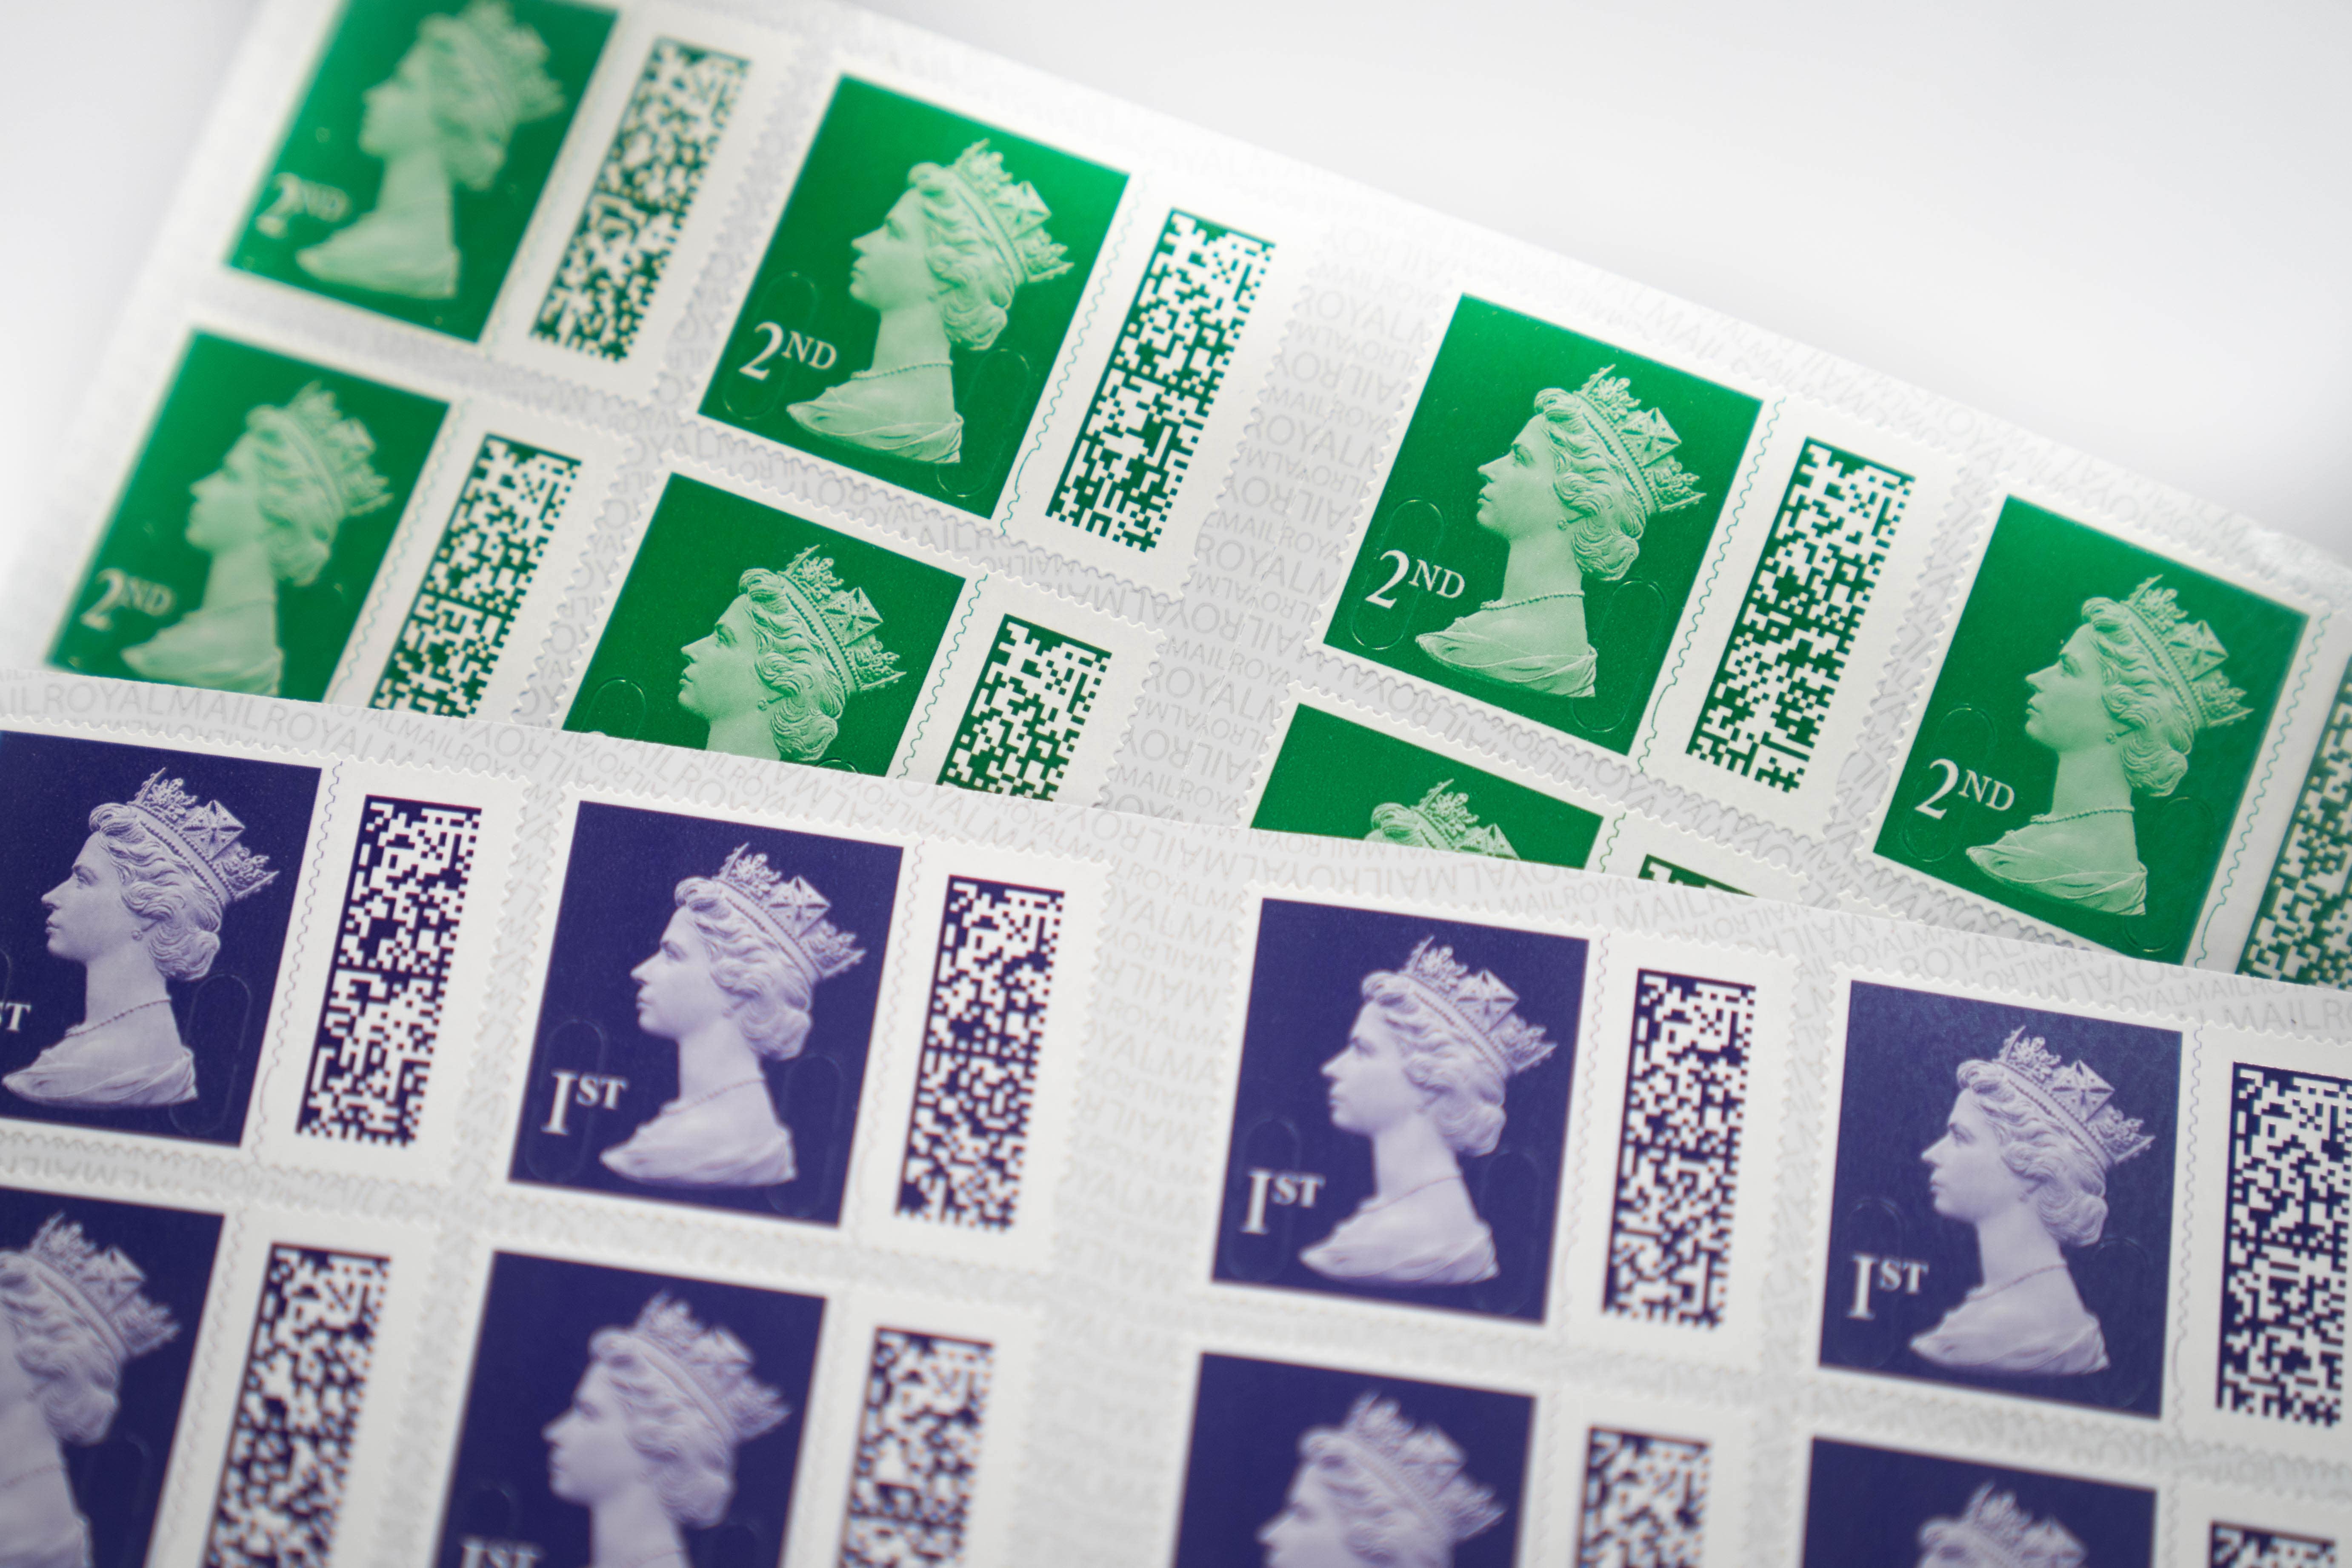 The Royal Mail said it is working hard to remove counterfeit stamps from circulation